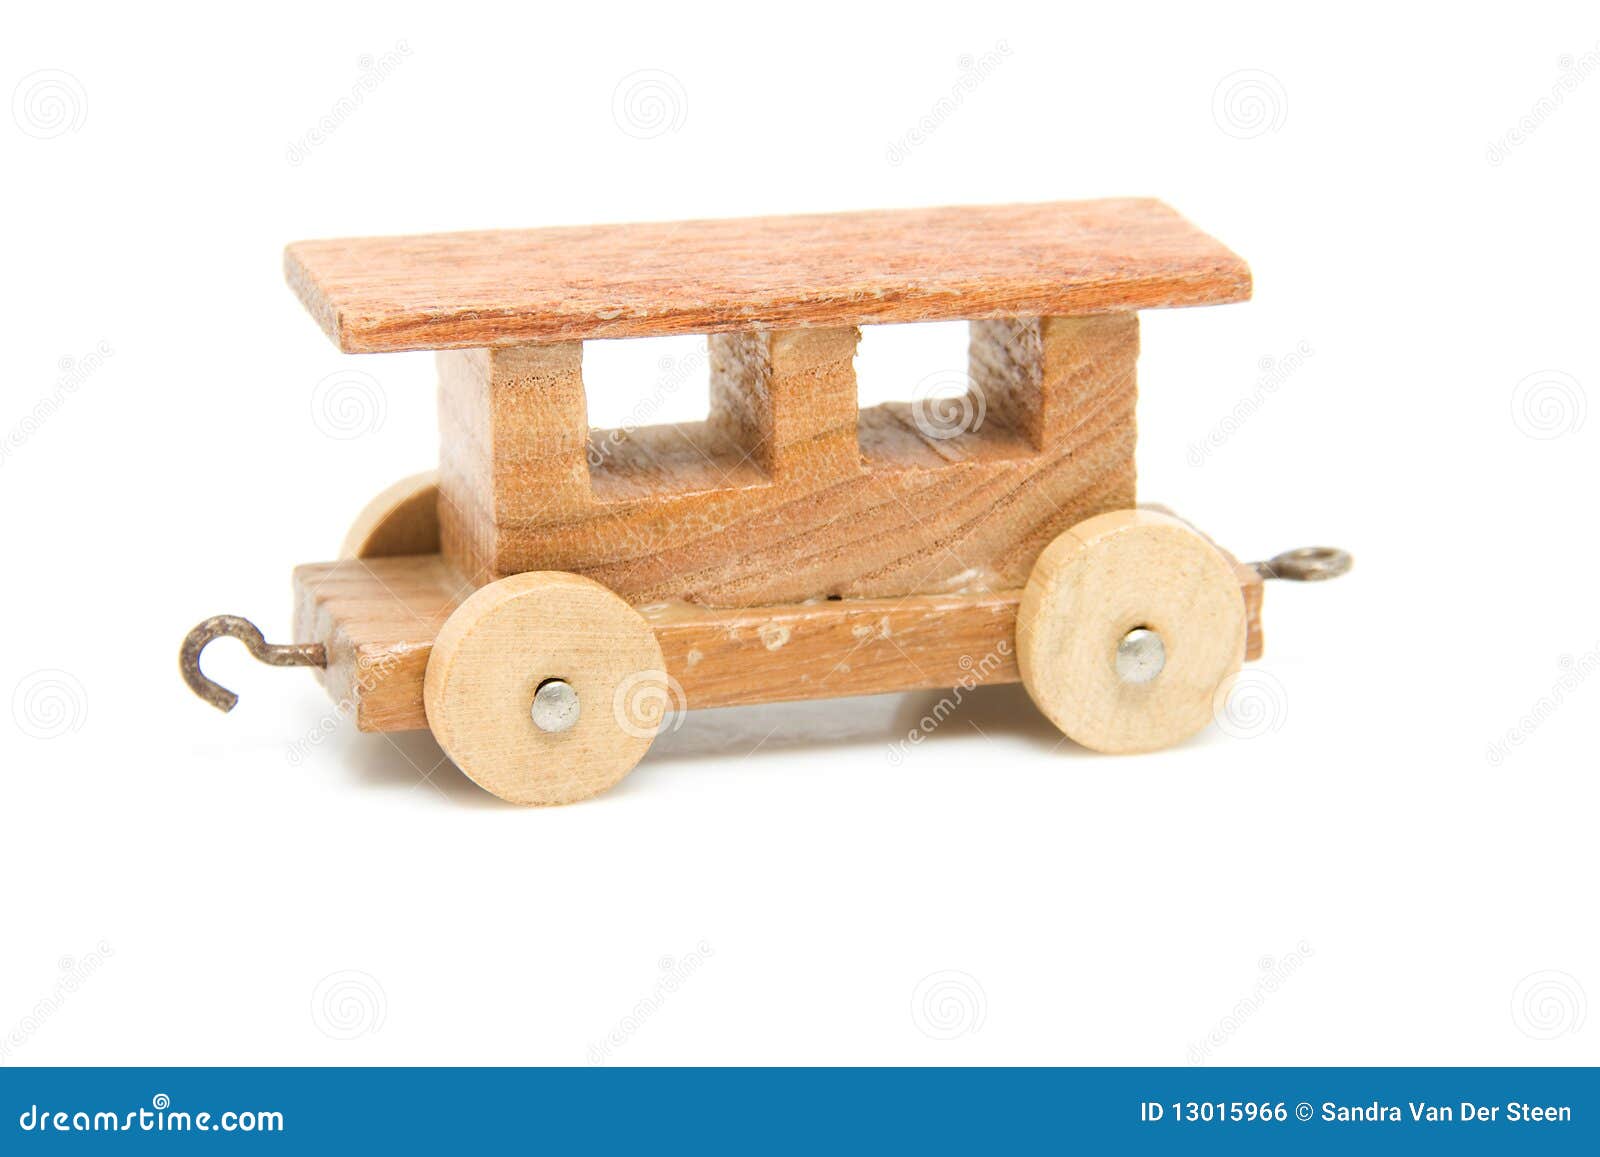 Old Wooden Toy Train Royalty Free Stock Image - Image ...